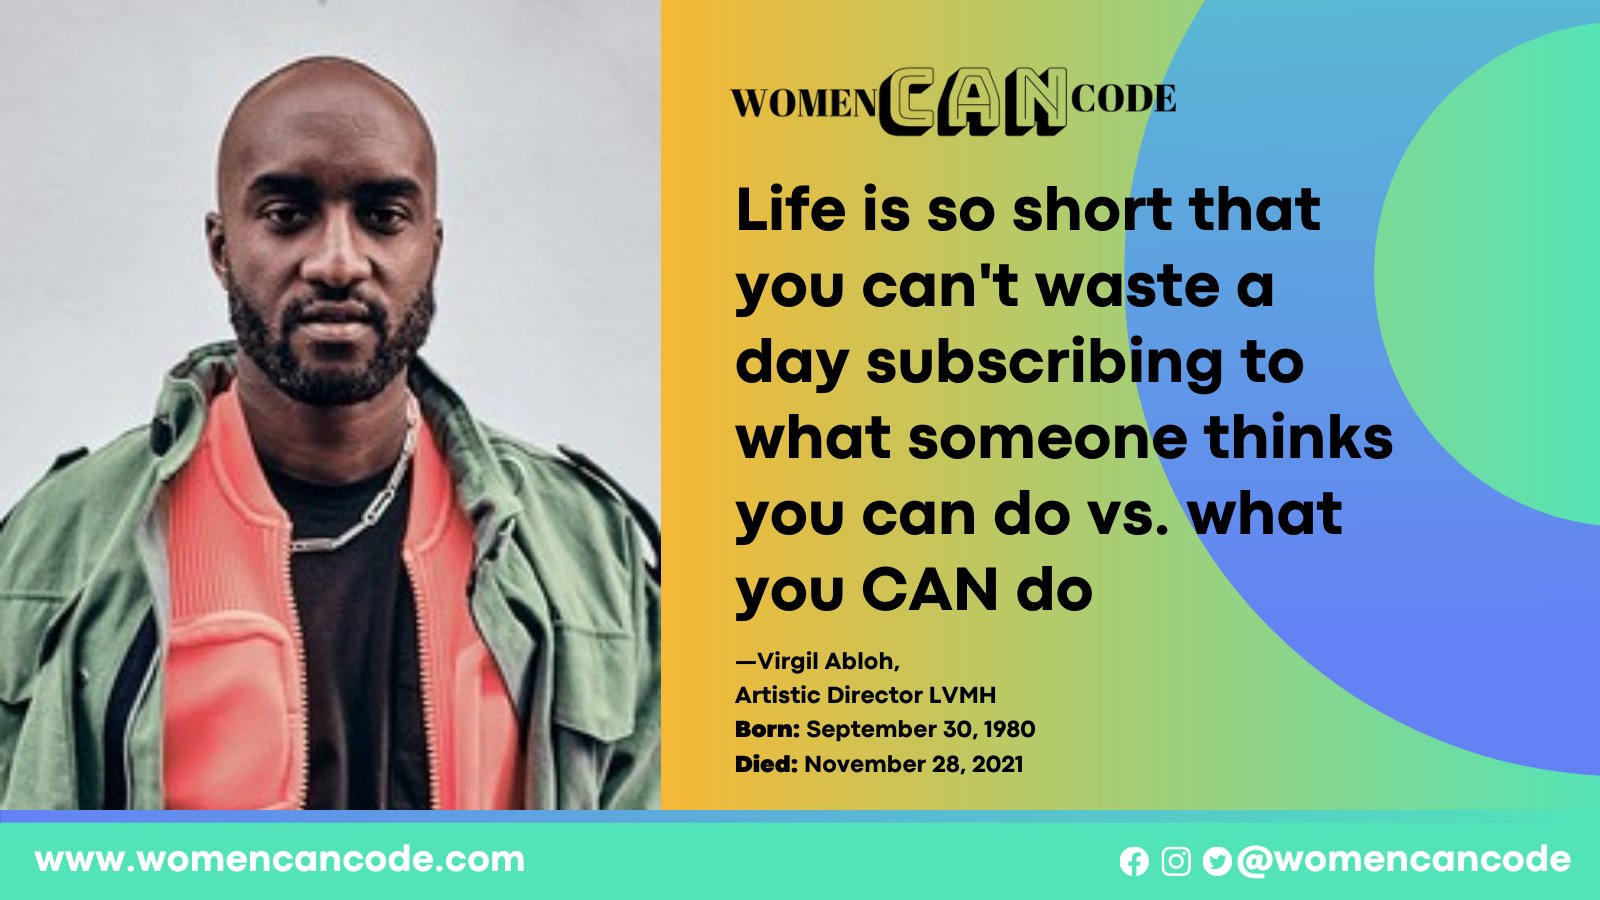 Women CAN code #womencancode on X: Life is so short that you can't waste a  day subscribing to what someone thinks you can do vs. what you CAN do - Virgil  Abloh